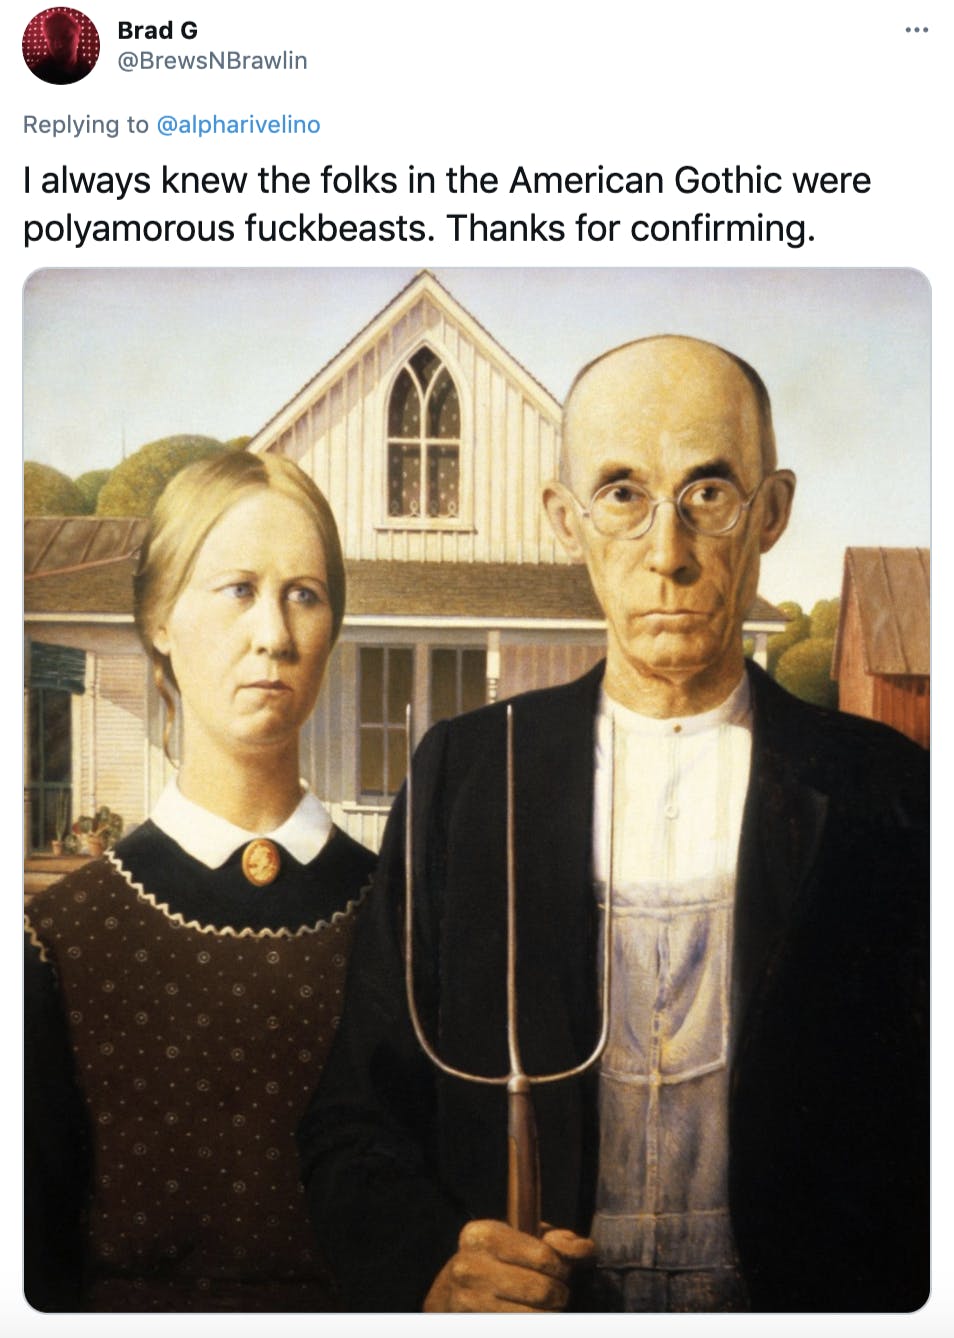 'I always knew the folks in the American Gothic were polyamorous fuckbeasts. Thanks for confirming.' The American Gothic painting, featuring two elderly farmers, a woman and a man. Both face forwards and are dressed in old fashioned clothing and the man is holding a pitch fork.